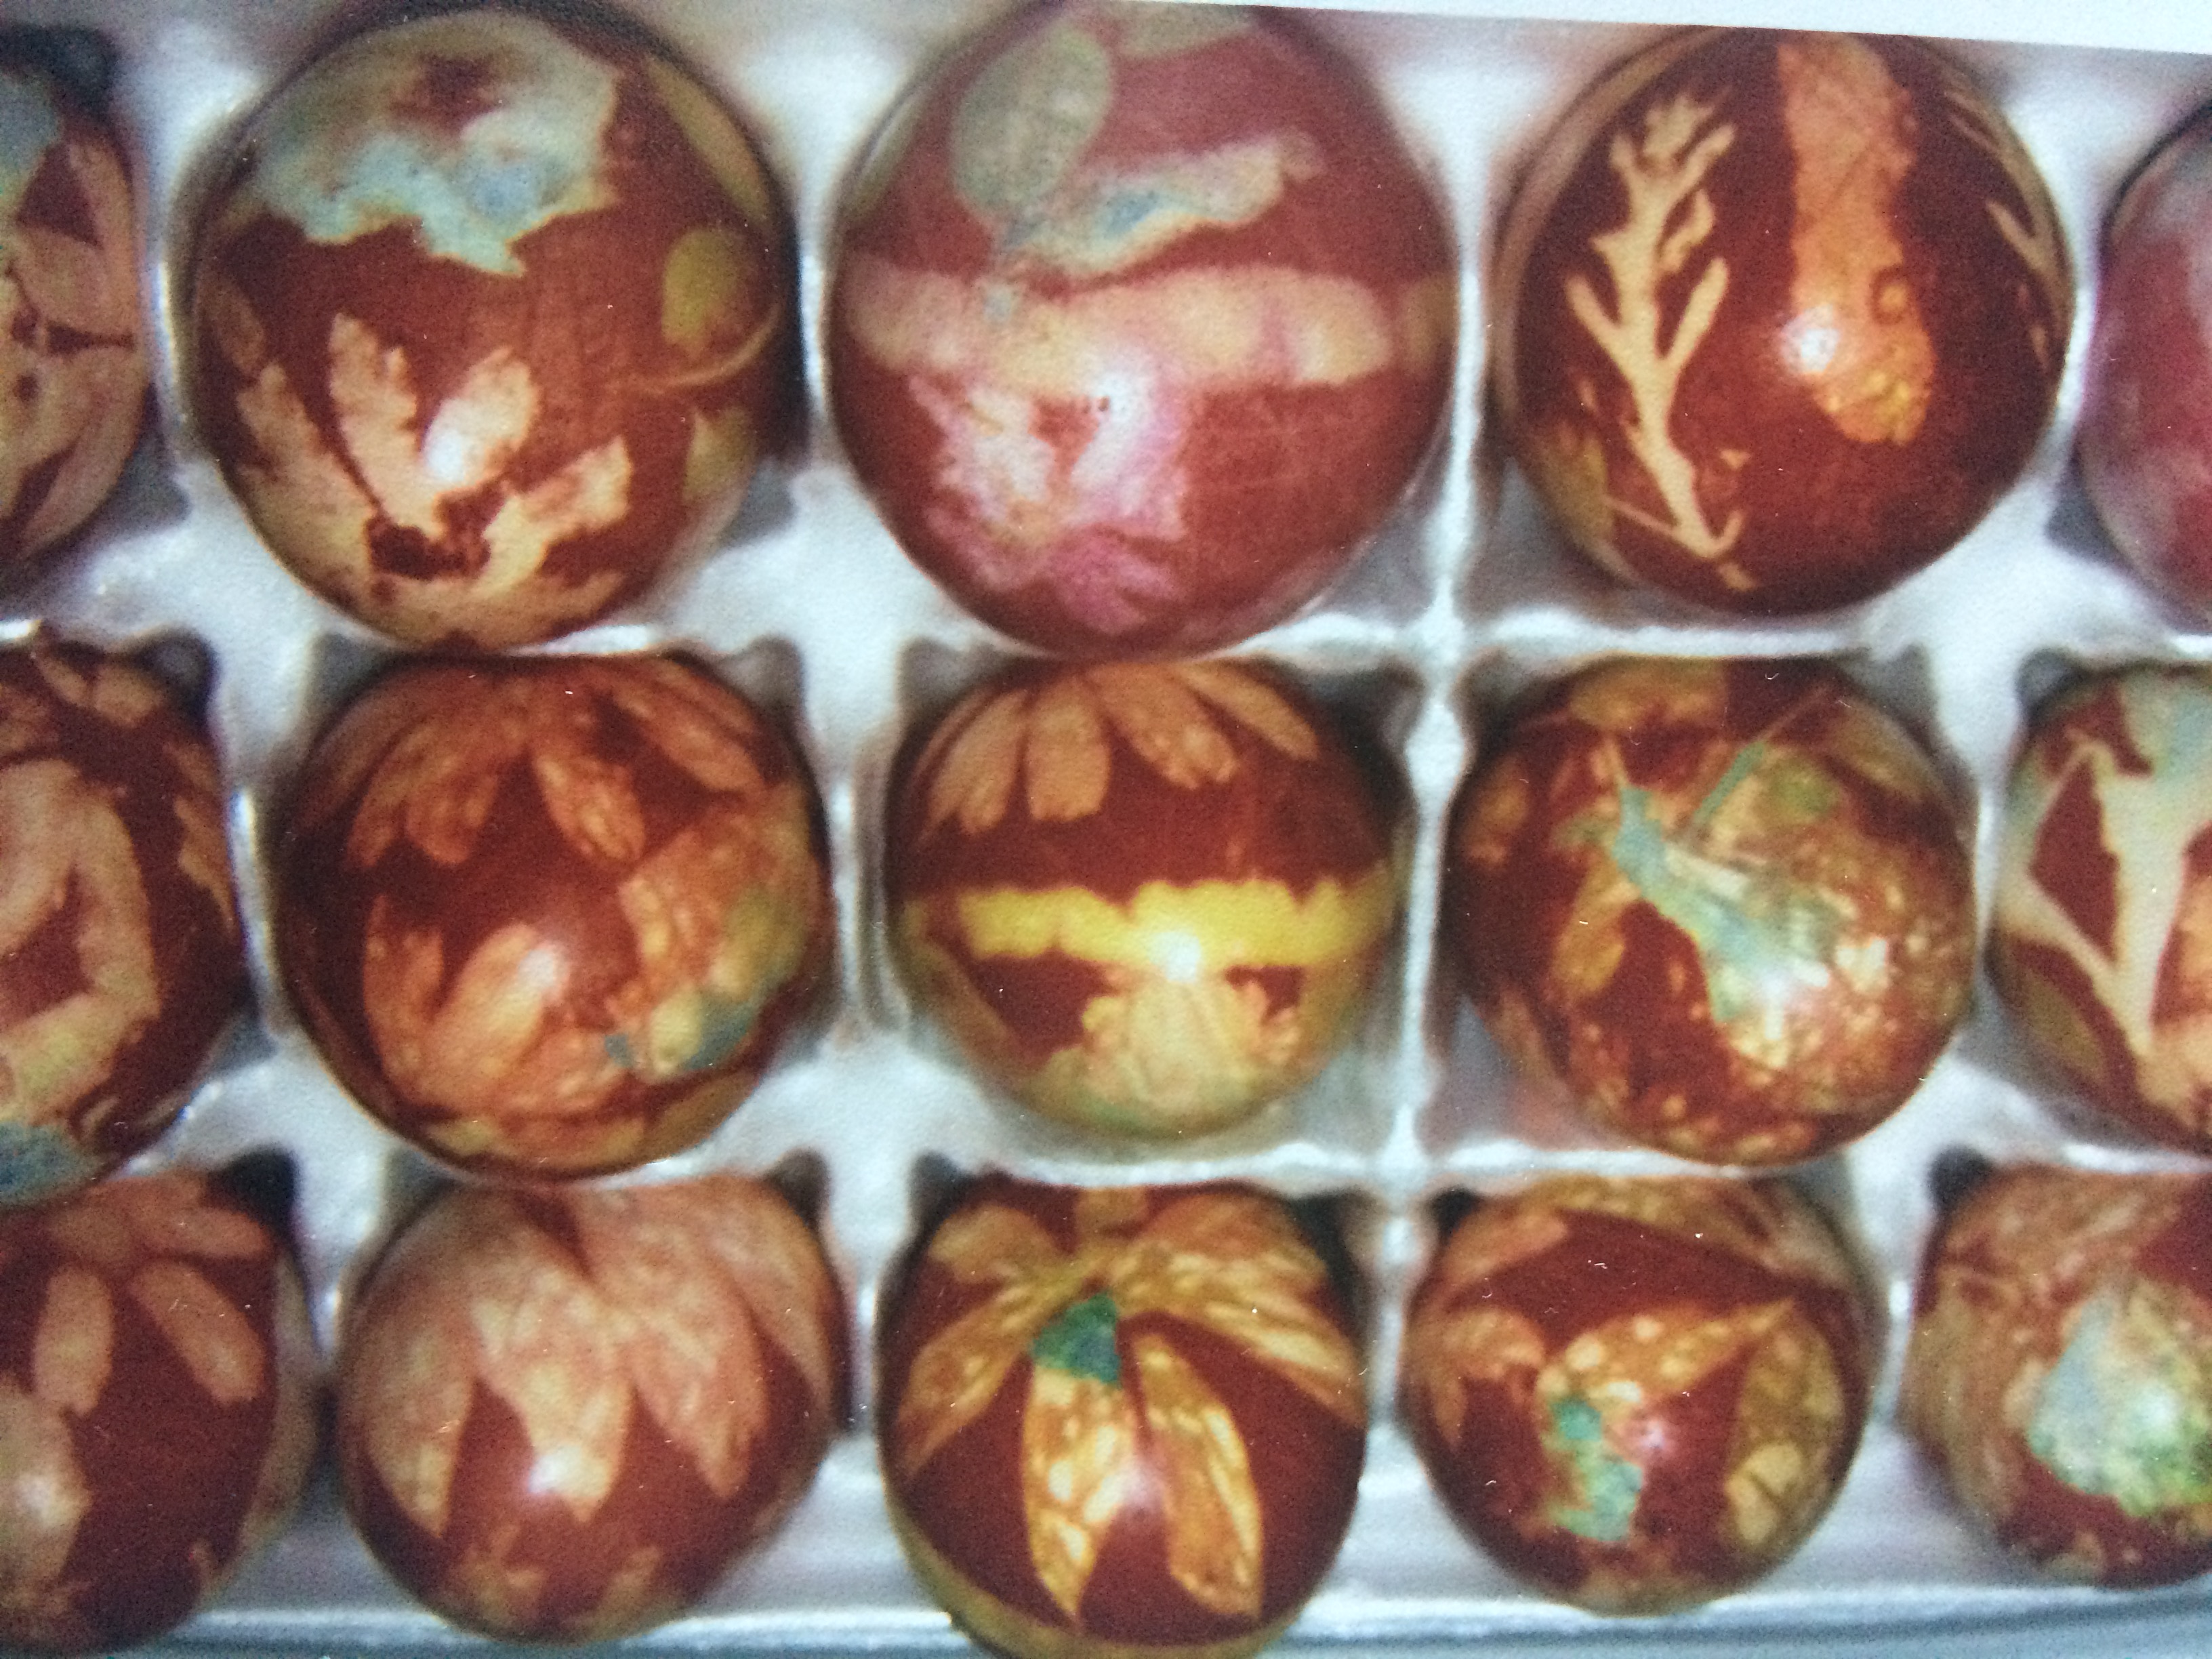 Eggs dyed in the Swiss tradition